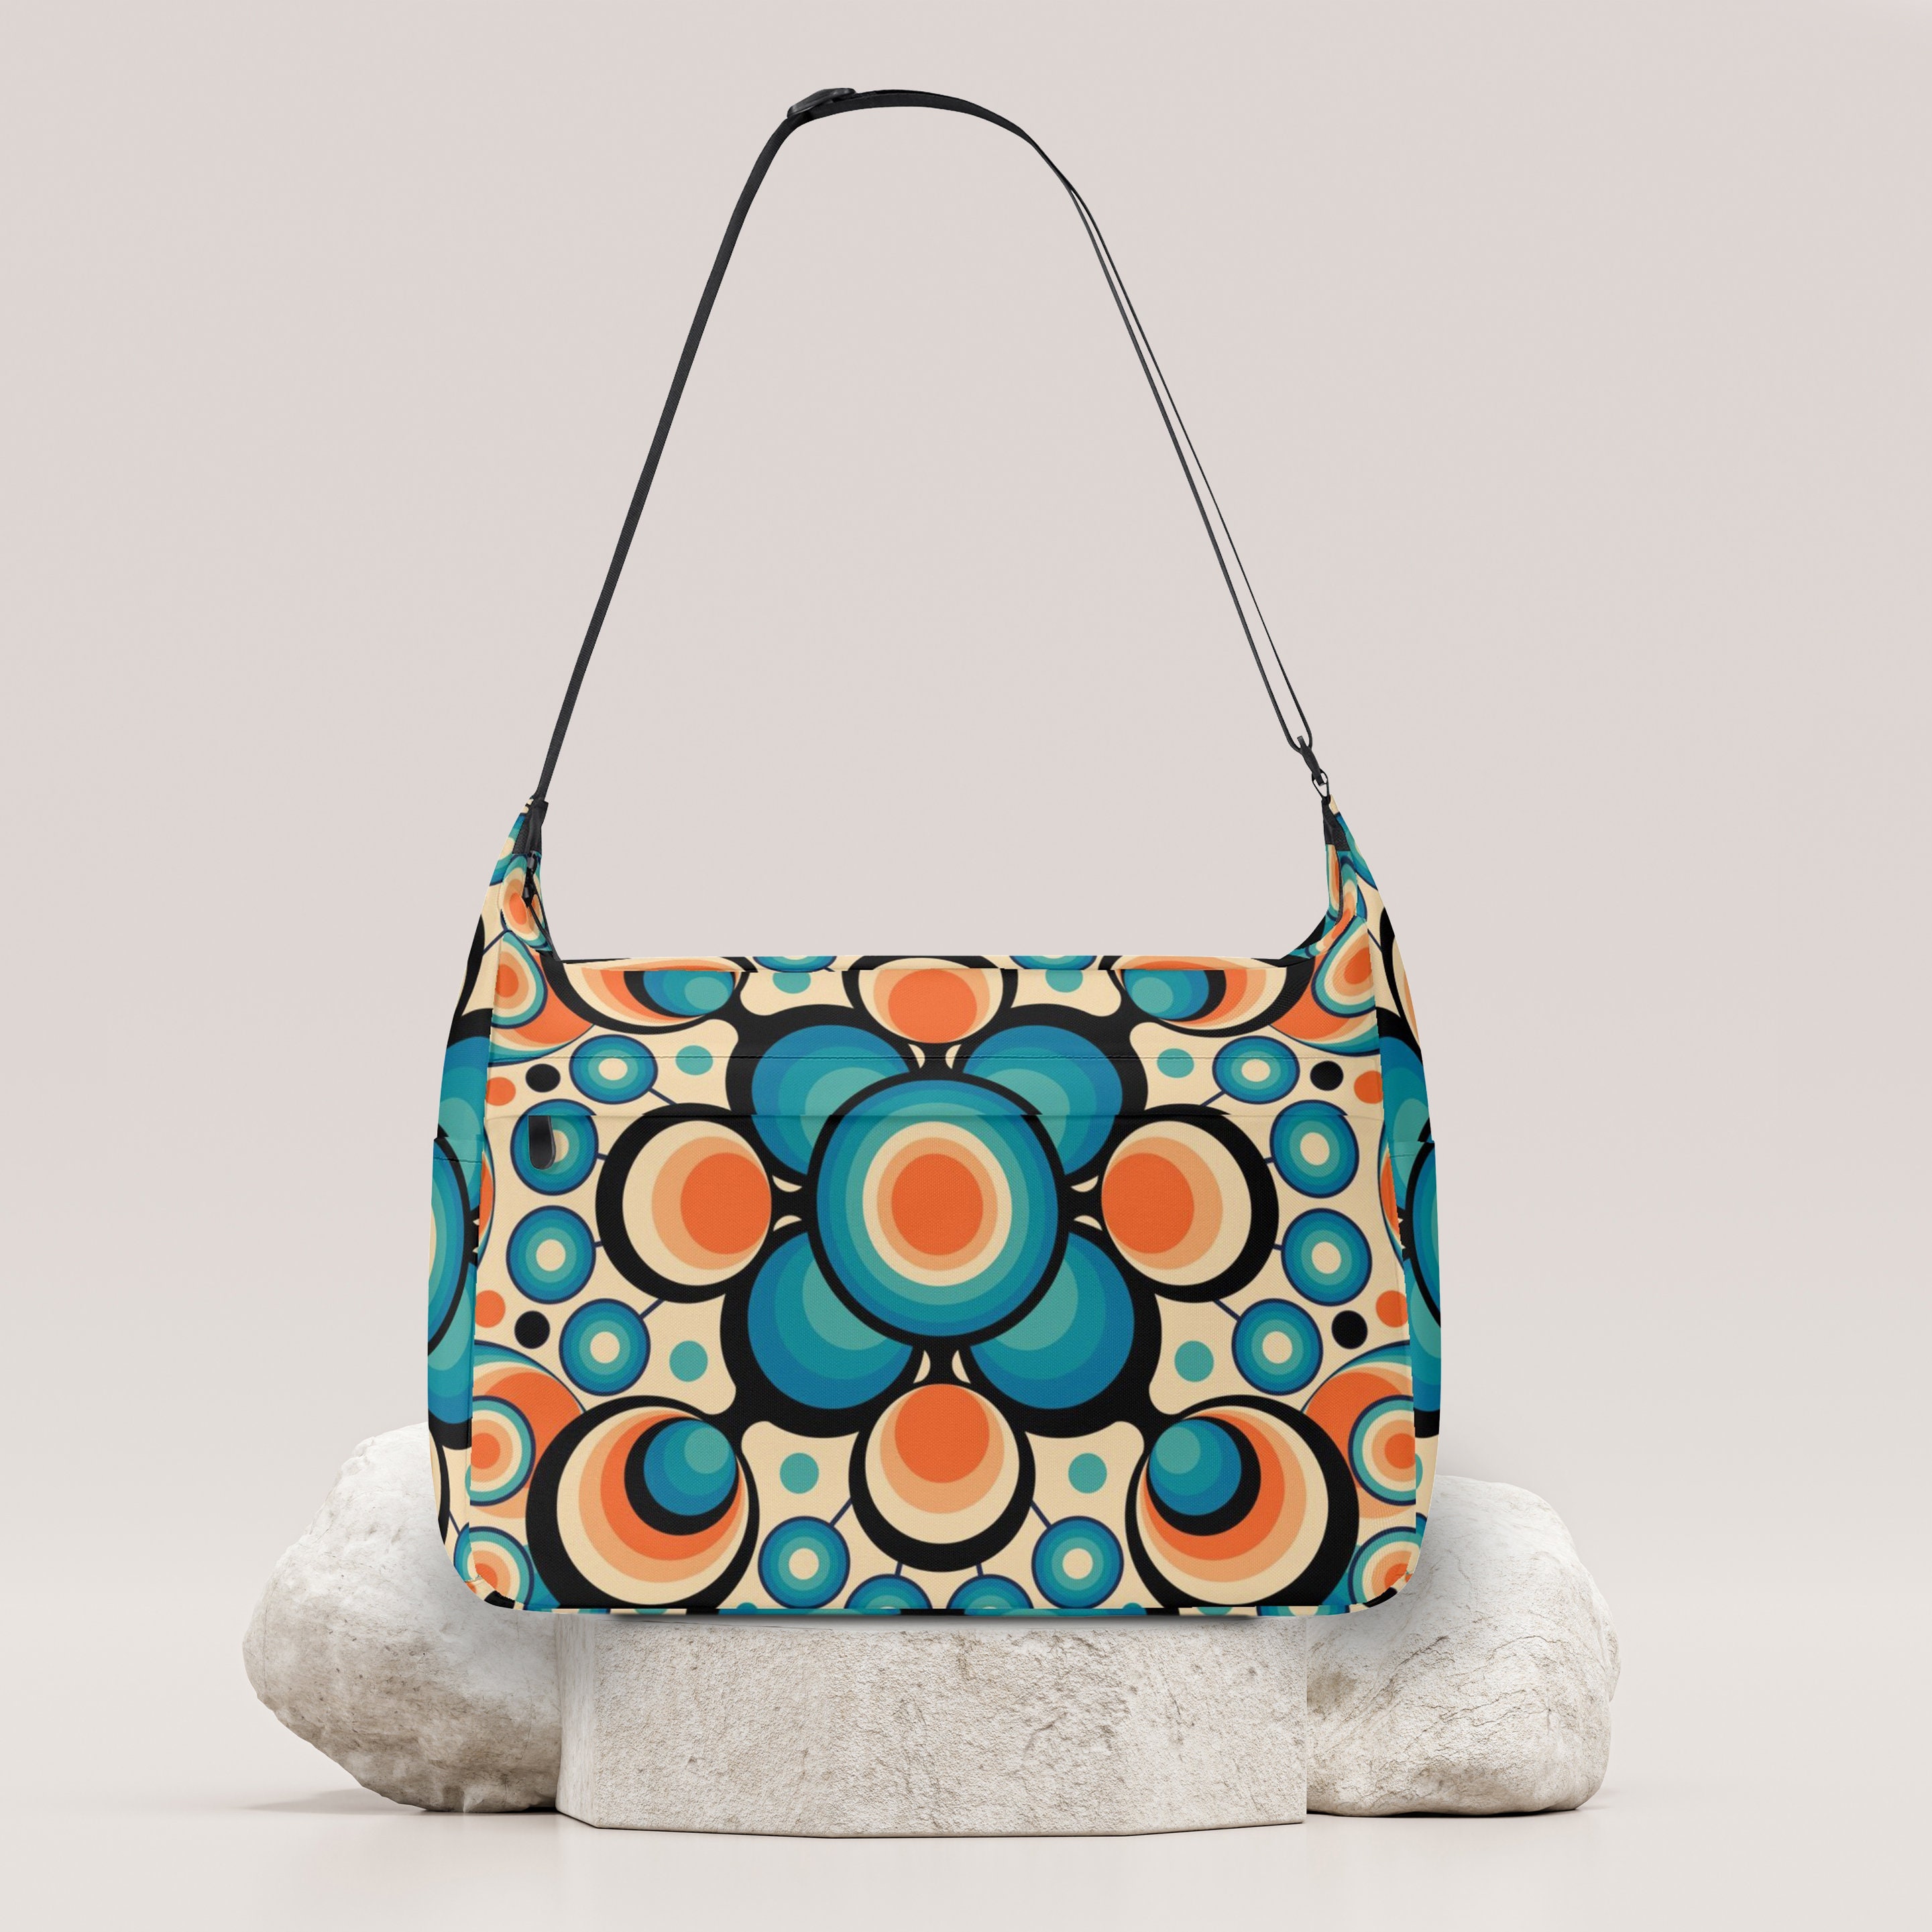 Extravagant Turquoise Leather Bag, Turquoise Leather Purse, Funky Shoulder Bag with Detachable Black Strap TLB26, Carousel Collection